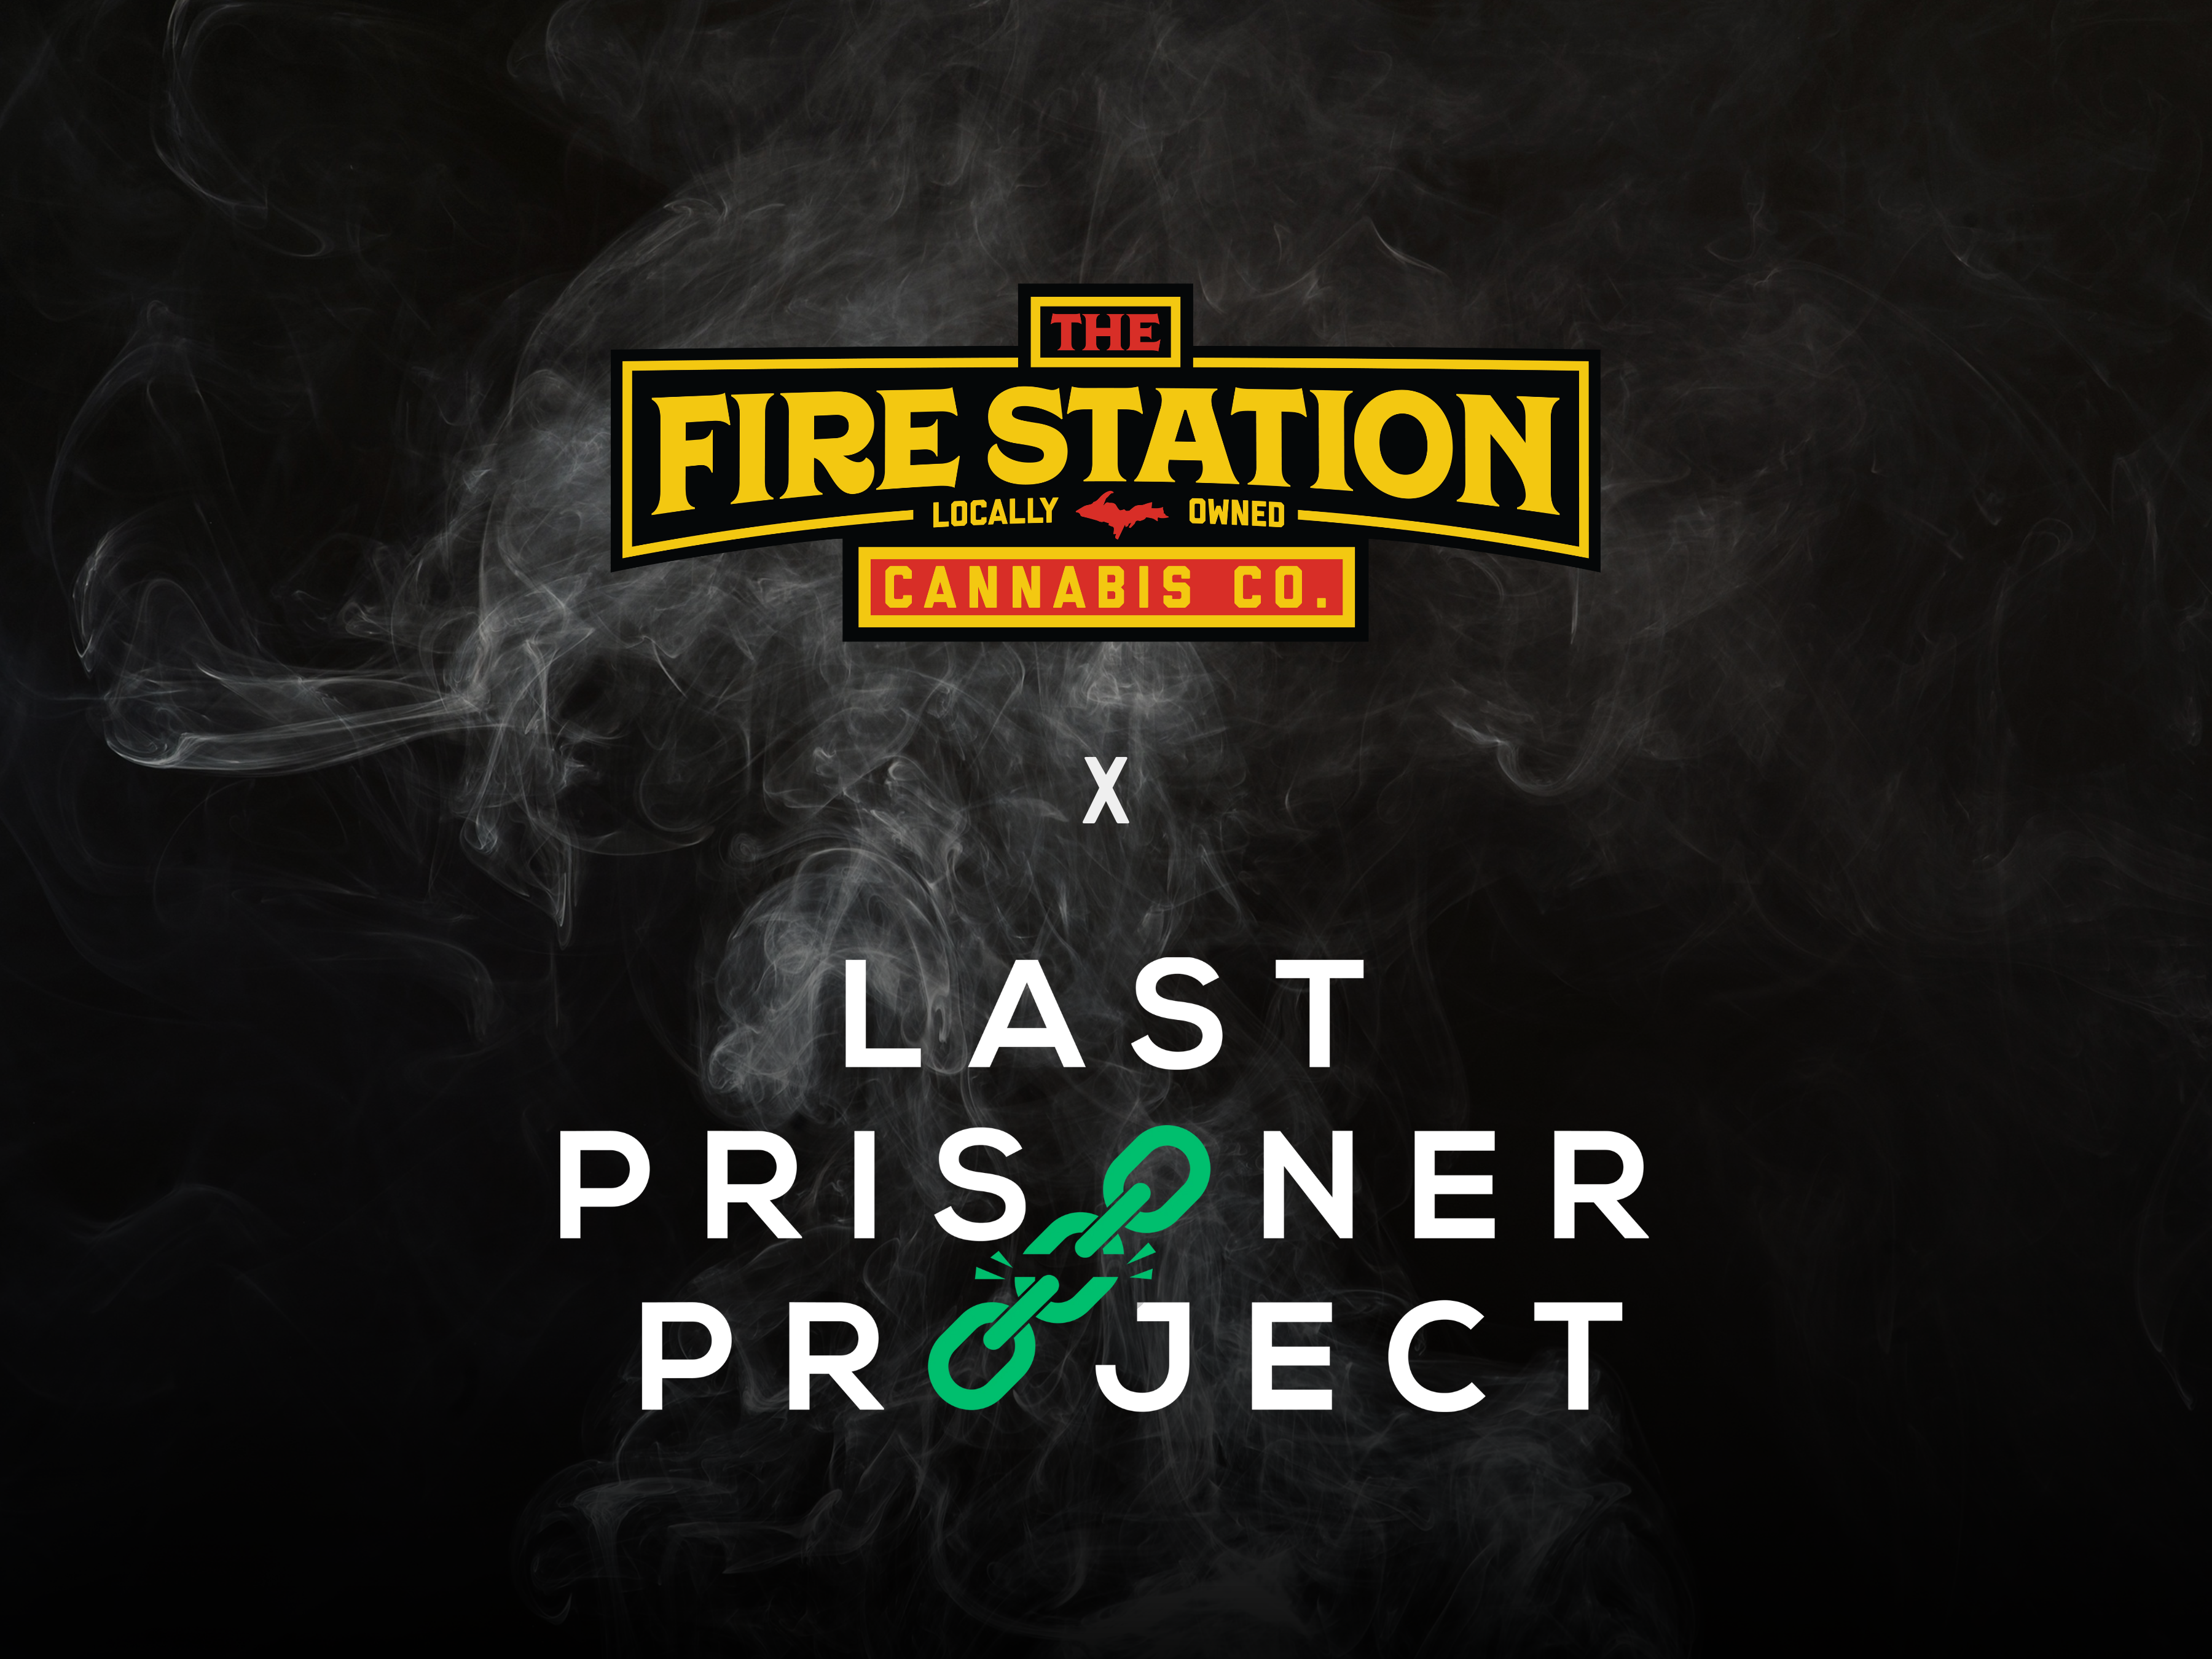 This Fire Station has partnered with the Last Prisoner Project for their holiday letter writing campaign. Each store will have a letter writing station in the lobby area where customers can write a letter to an individual who was incarcerated for cannabis. TFS will then take care of mailing these envelopes to the chosen individuals.